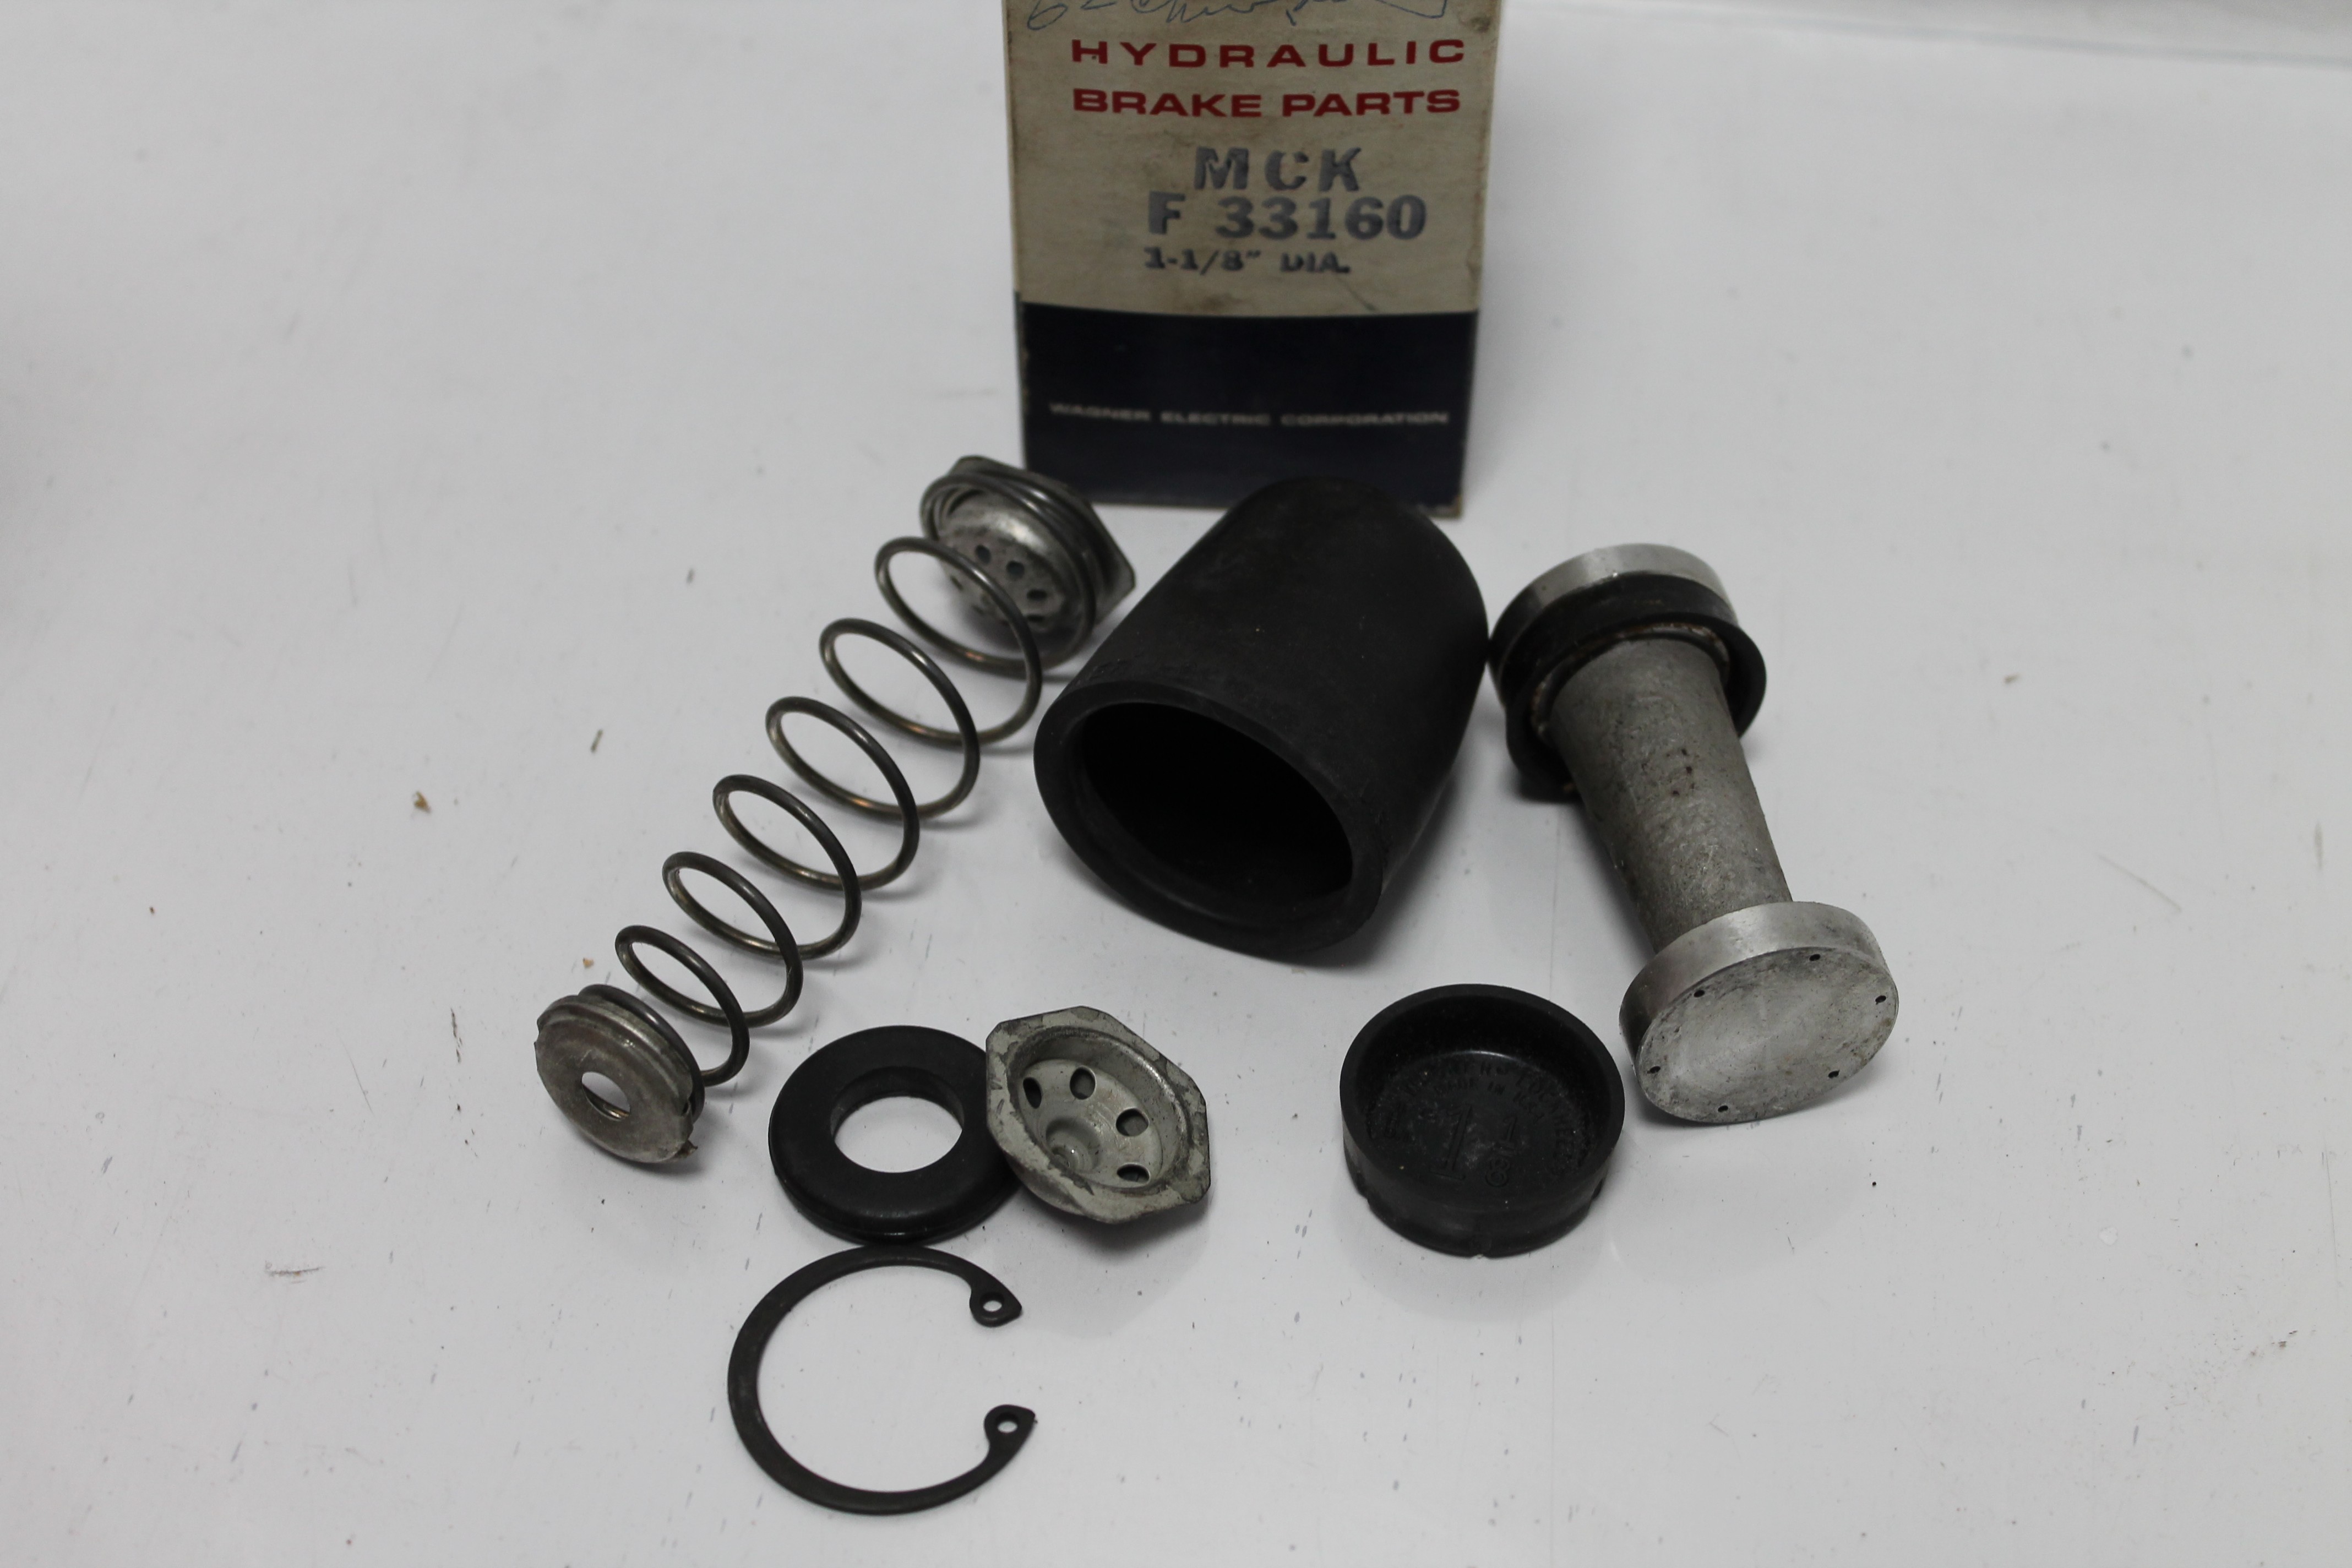 KIT REPARATION MAITRE CYLINDRE, Frein hydraulique, JEEP